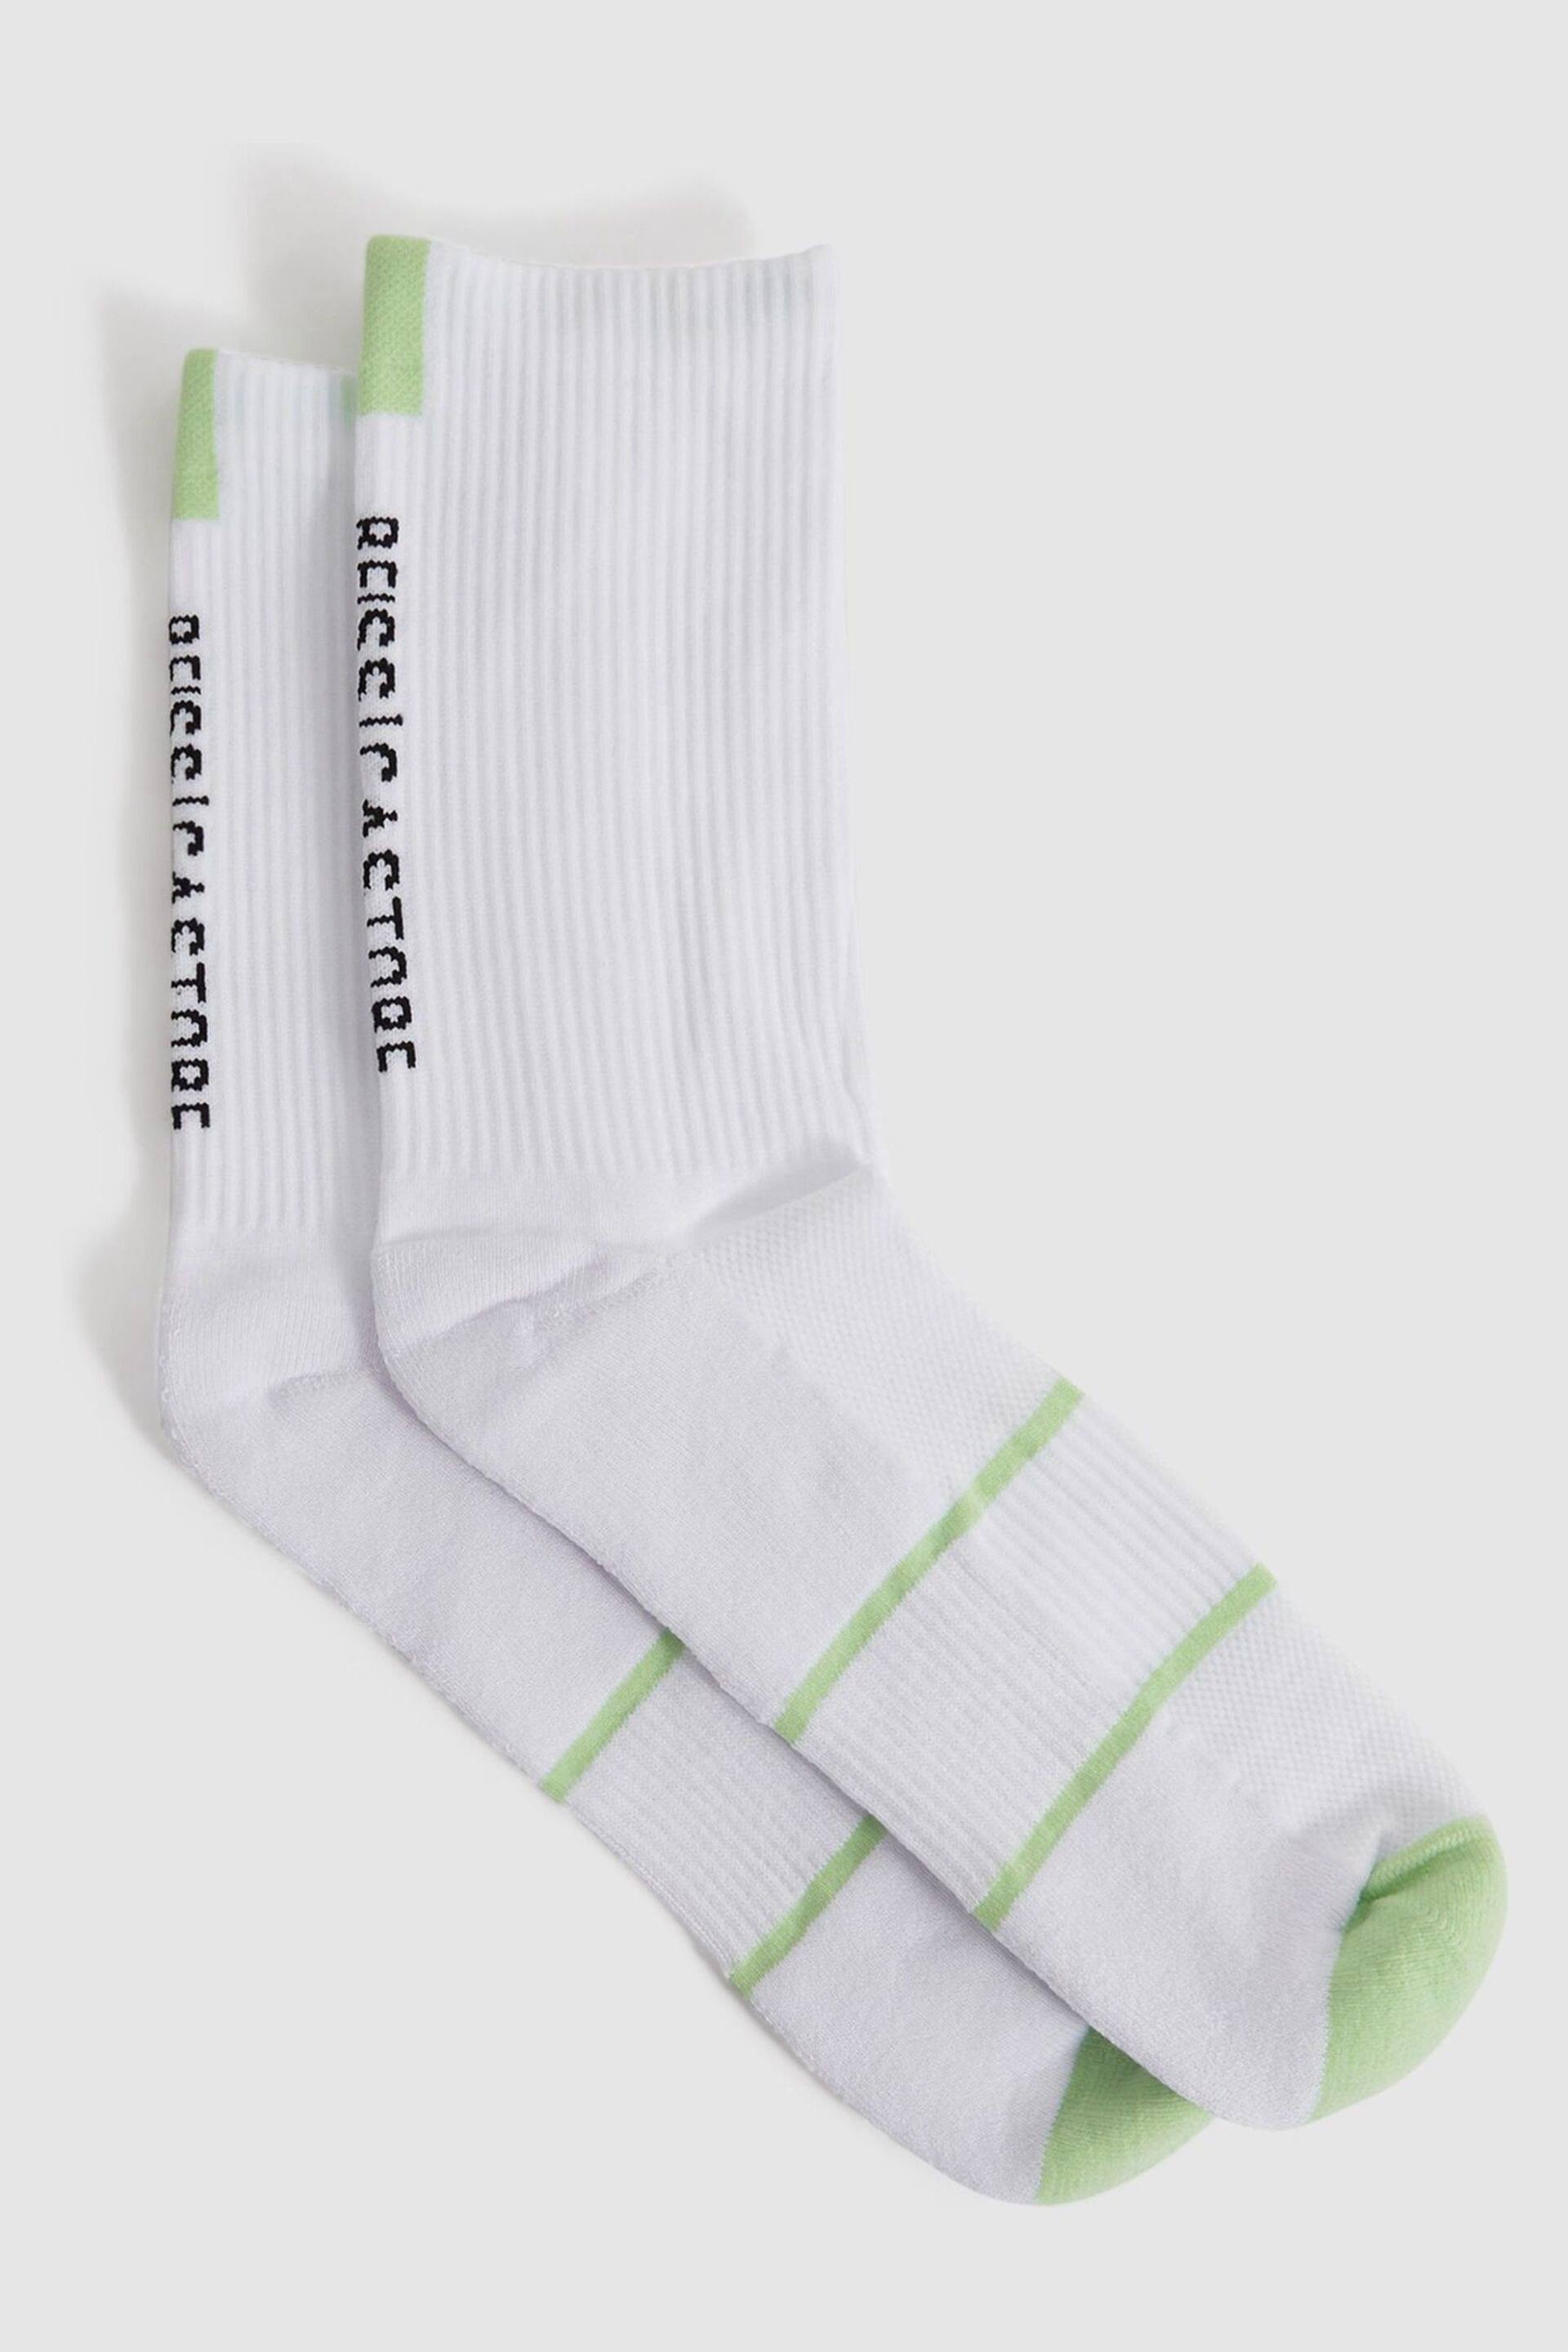 Reiss White Axel Castore Ribbed Crew Cut Socks - Image 1 of 3